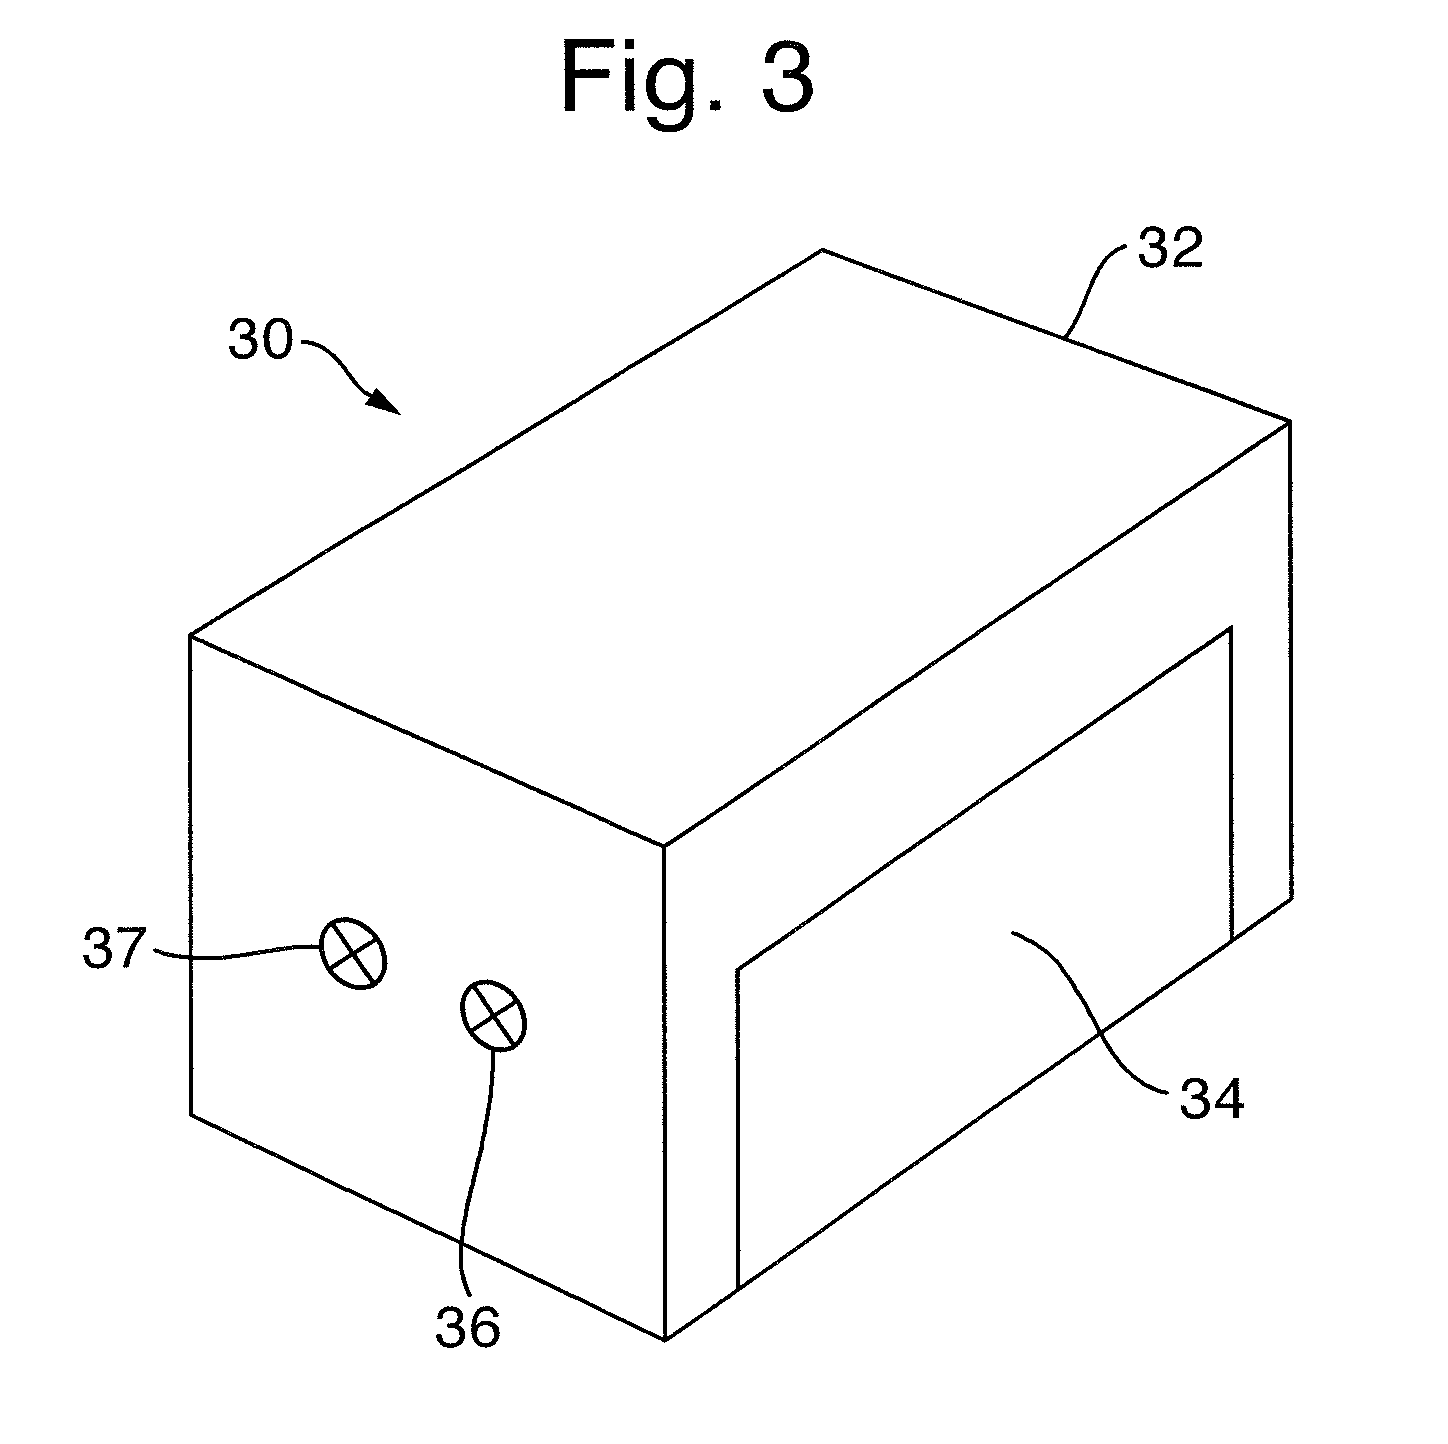 Devices and methods for emanating liquids